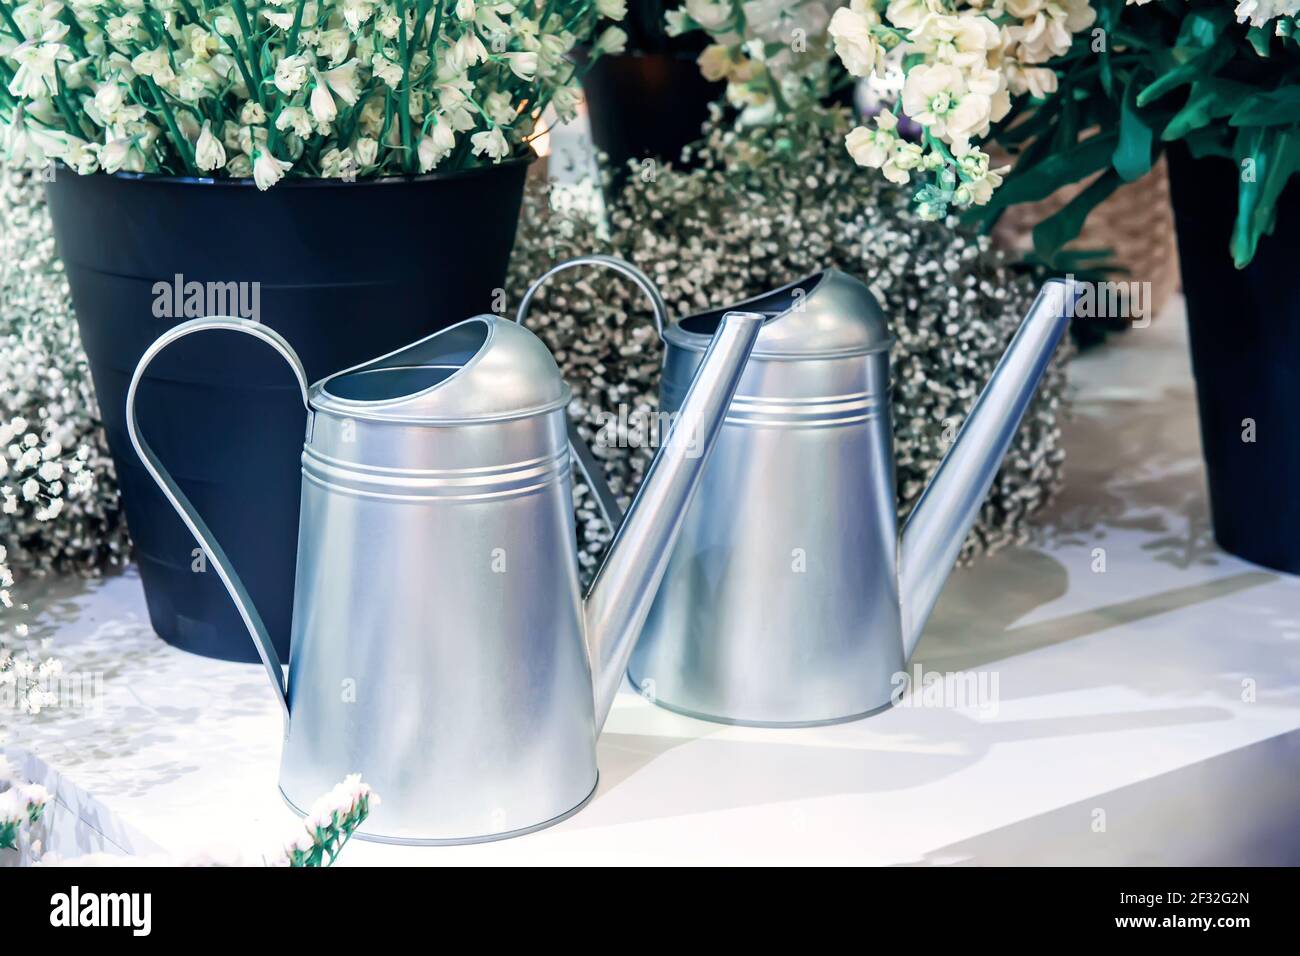 Garden metal watering cans are sold in the hardware store on the retail shelf. the concept of care for indoor and garden plants. Stock Photo